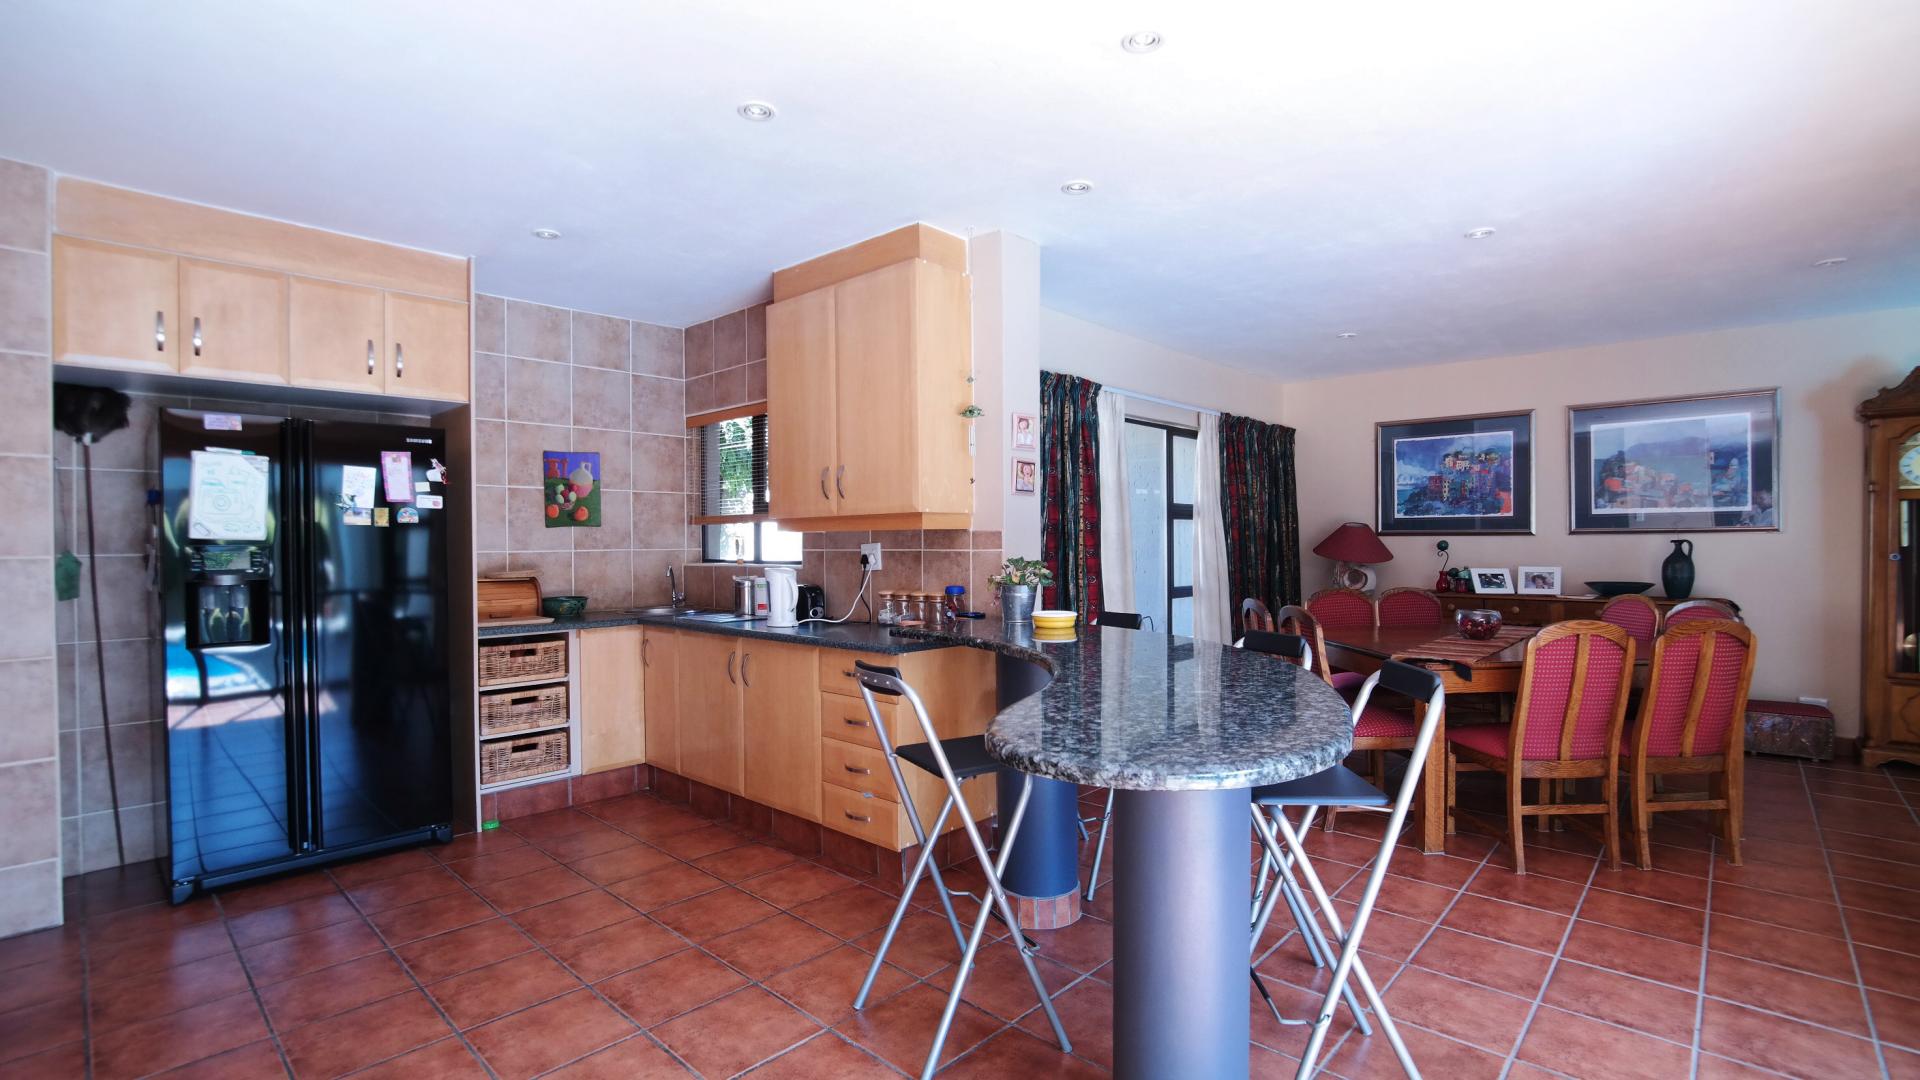 Kitchen - 27 square meters of property in Woodhill Golf Estate